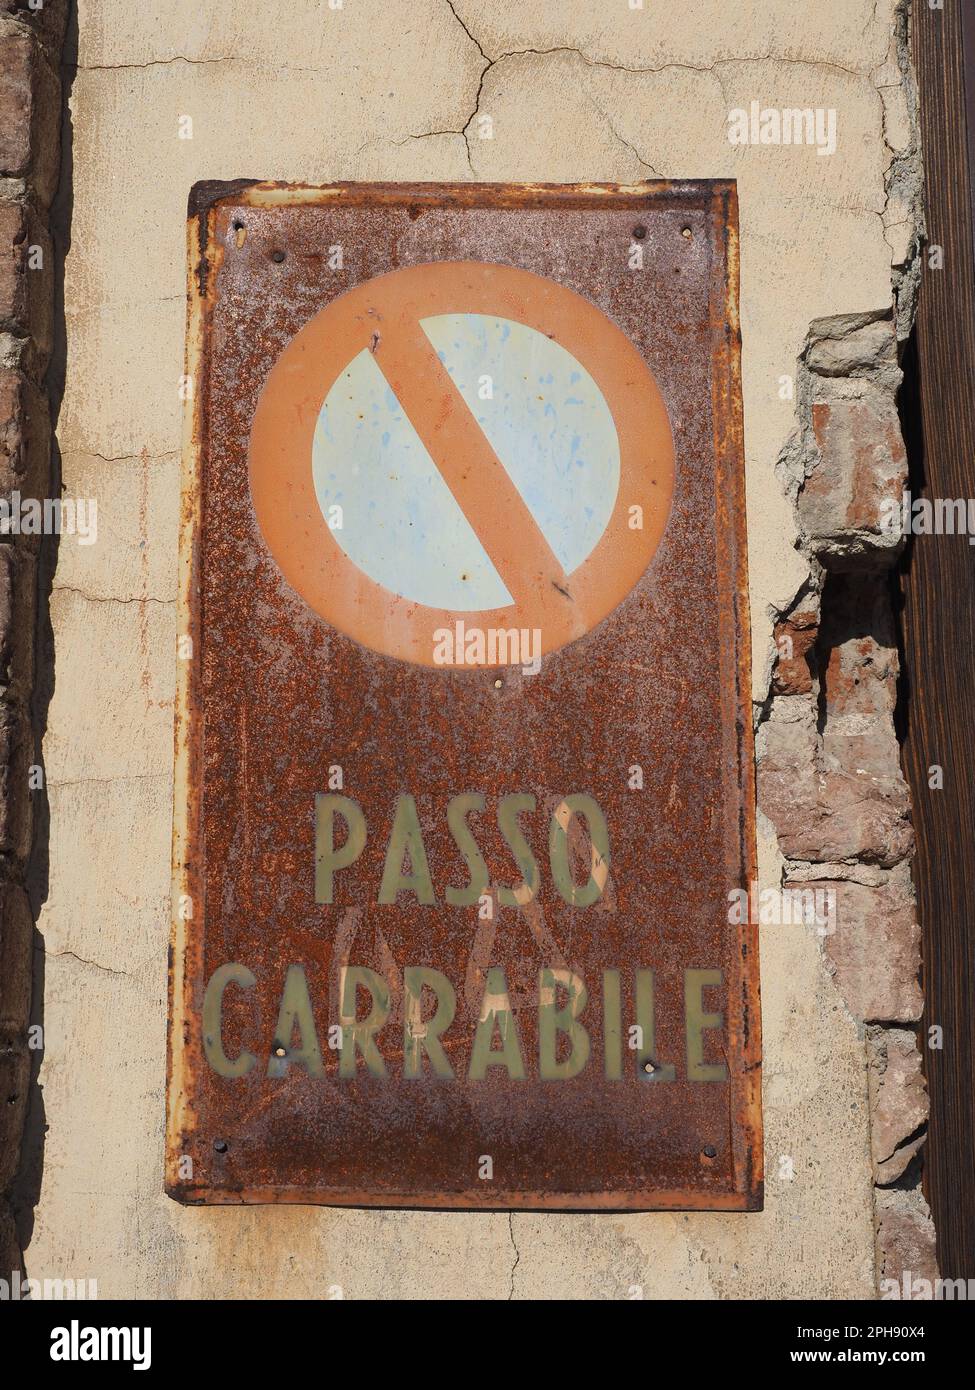 no parking traffic sign passo carrabile translation tow away zone Stock  Photo - Alamy